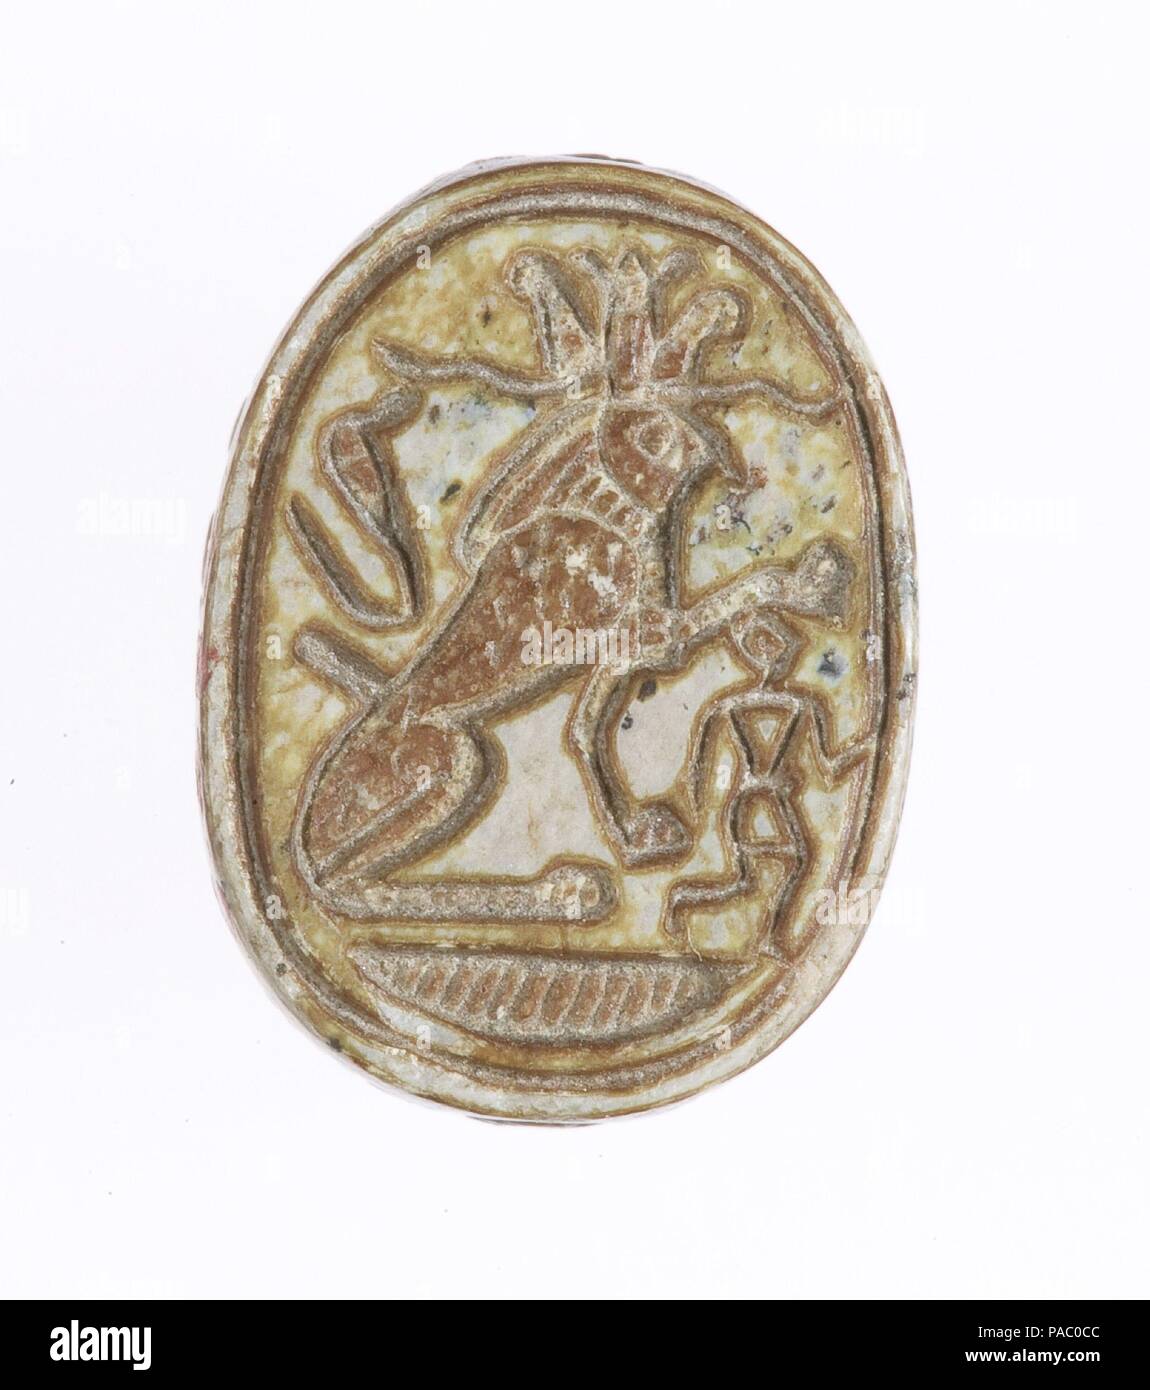 Scarab Inscribed With a Protective Motif. Dimensions: L. 1.5 cm (9/16 in); w. 1.2 cm (1/2 in); th. 0.8 cm (5/16 in). Dynasty: Dynasty 18, early. Reign: reign of Ahmose-Joint reign. Date: ca. 1550-1458 B.C..  The scarab's base depicts a falcon-headed sphinx wearing the 'atef' crown while subduing an enemy of Egypt. The falcon represents Re-Herakhti - the god Horus when he is merged with the sun. Museum: Metropolitan Museum of Art, New York, USA. Stock Photo